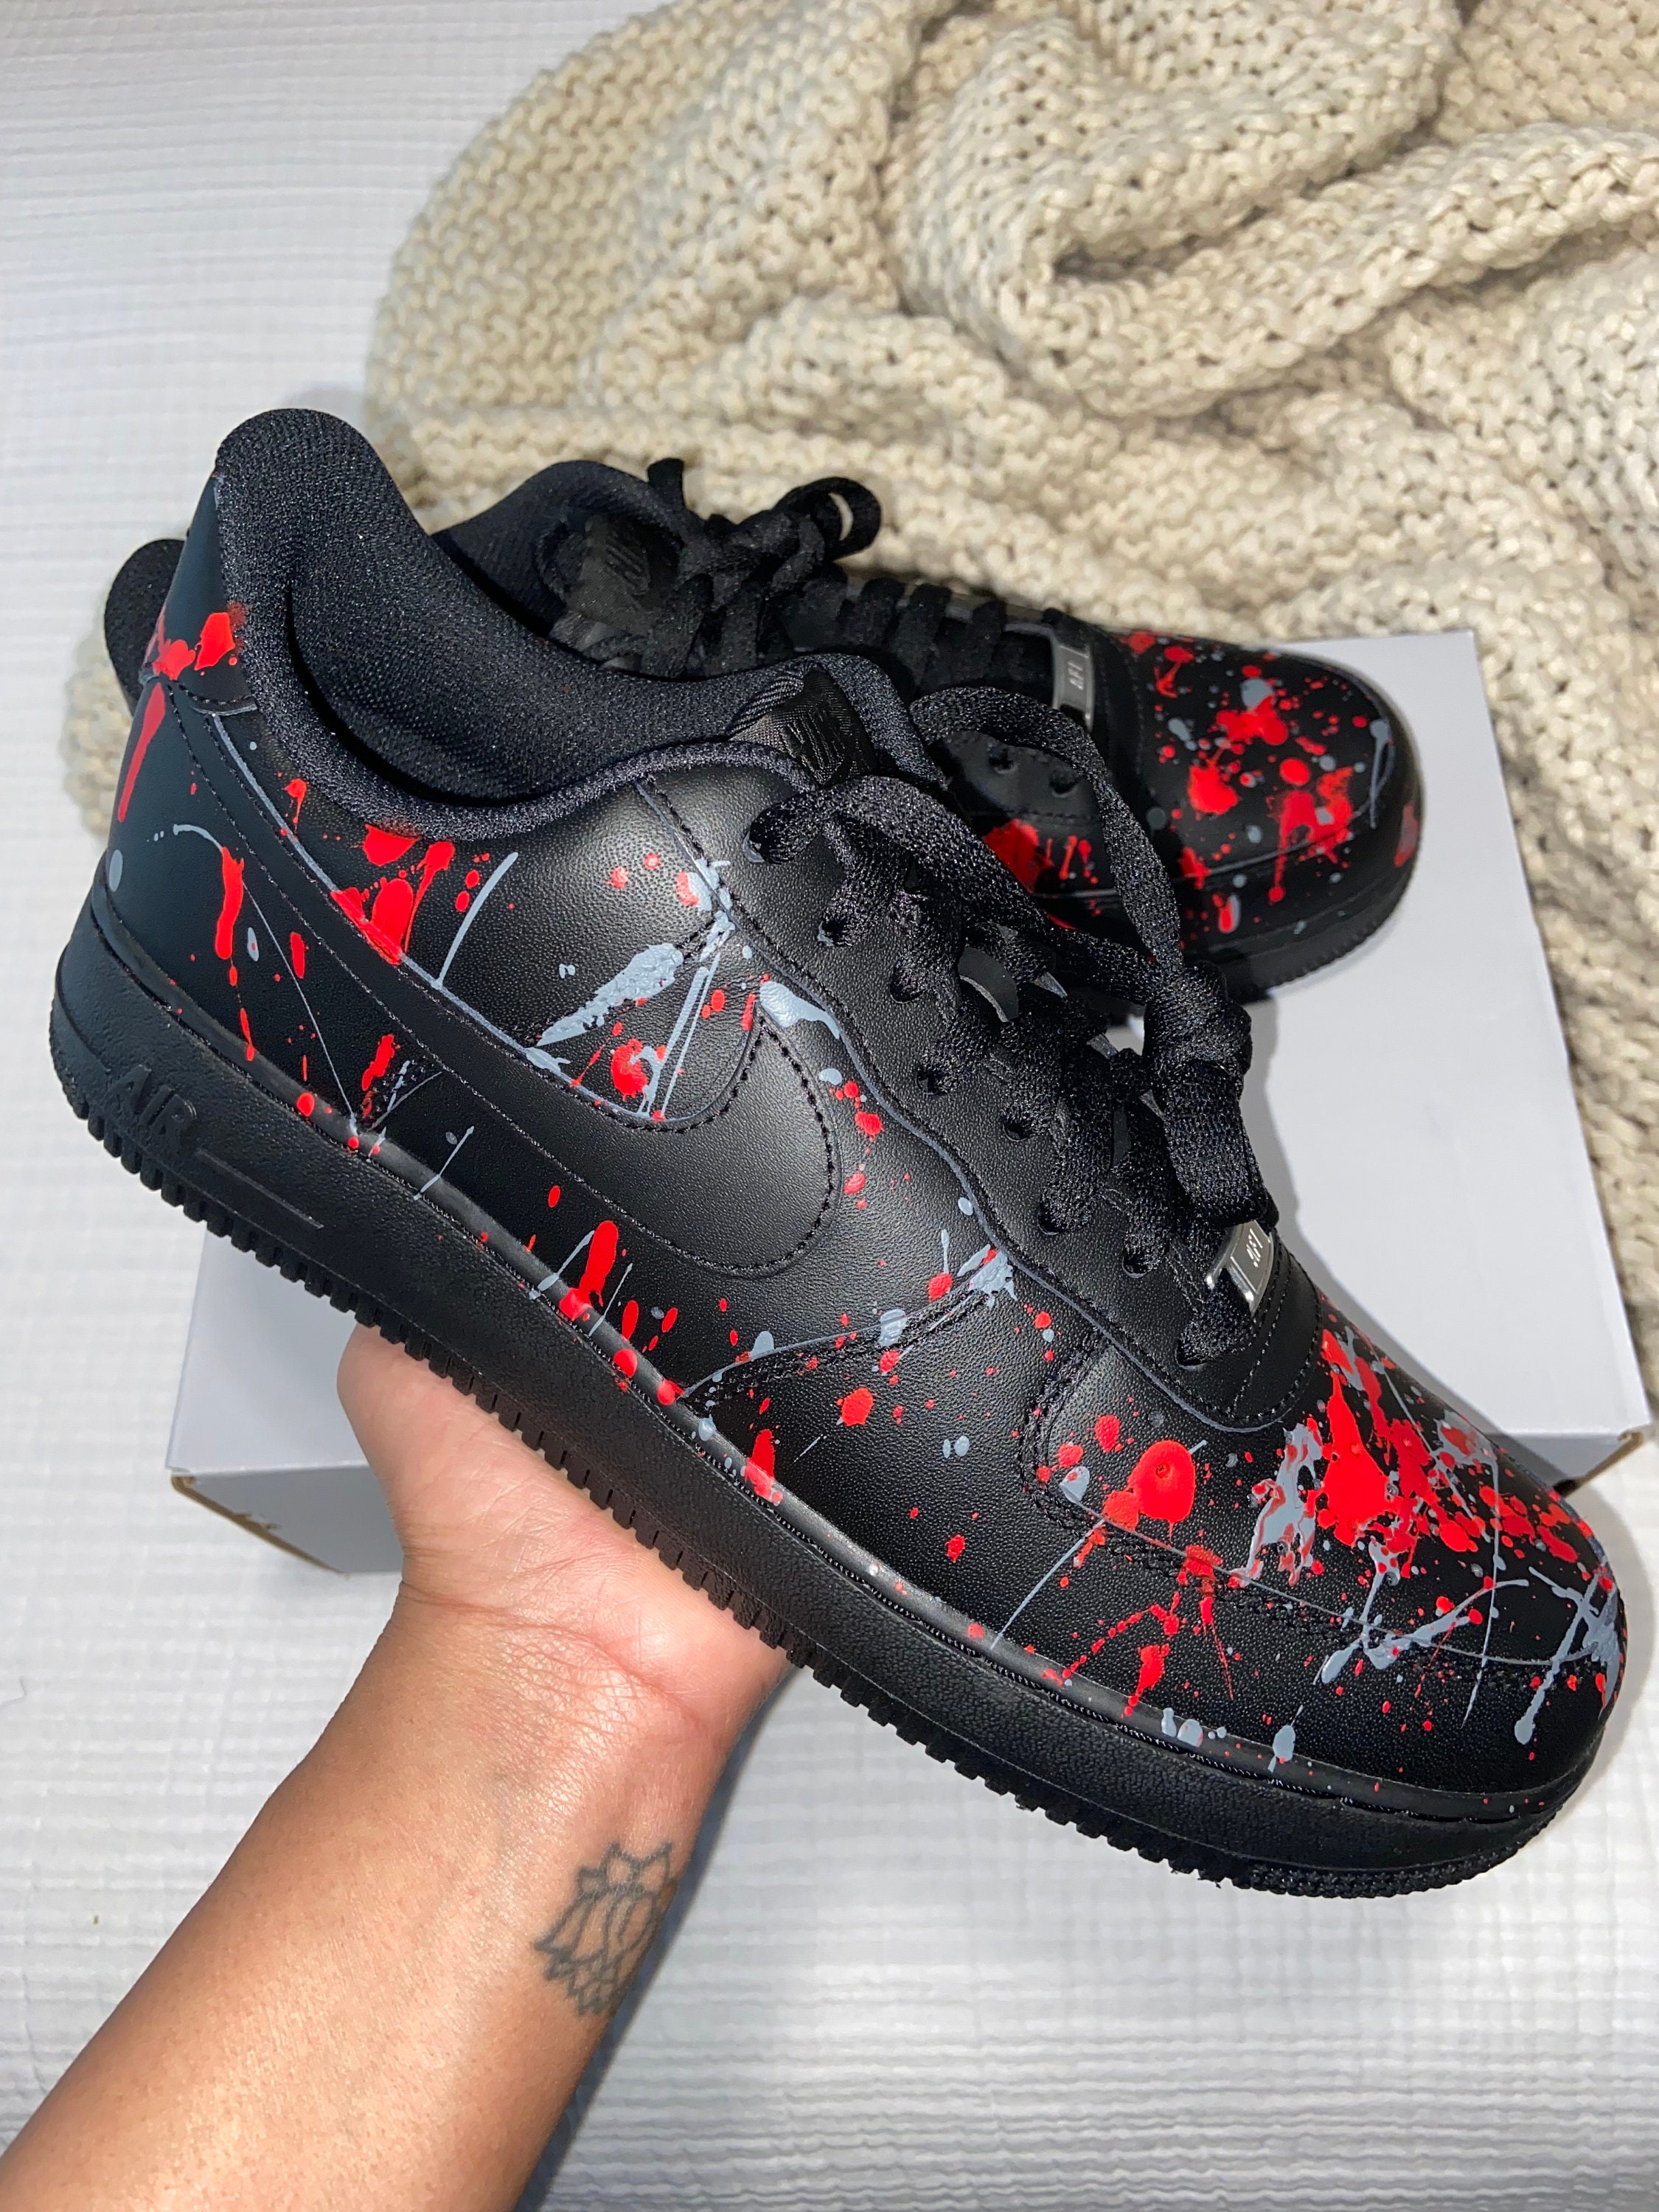 Nike Air Force 1 Low White Custom splatter paint shoes (Gray,Red,Black)